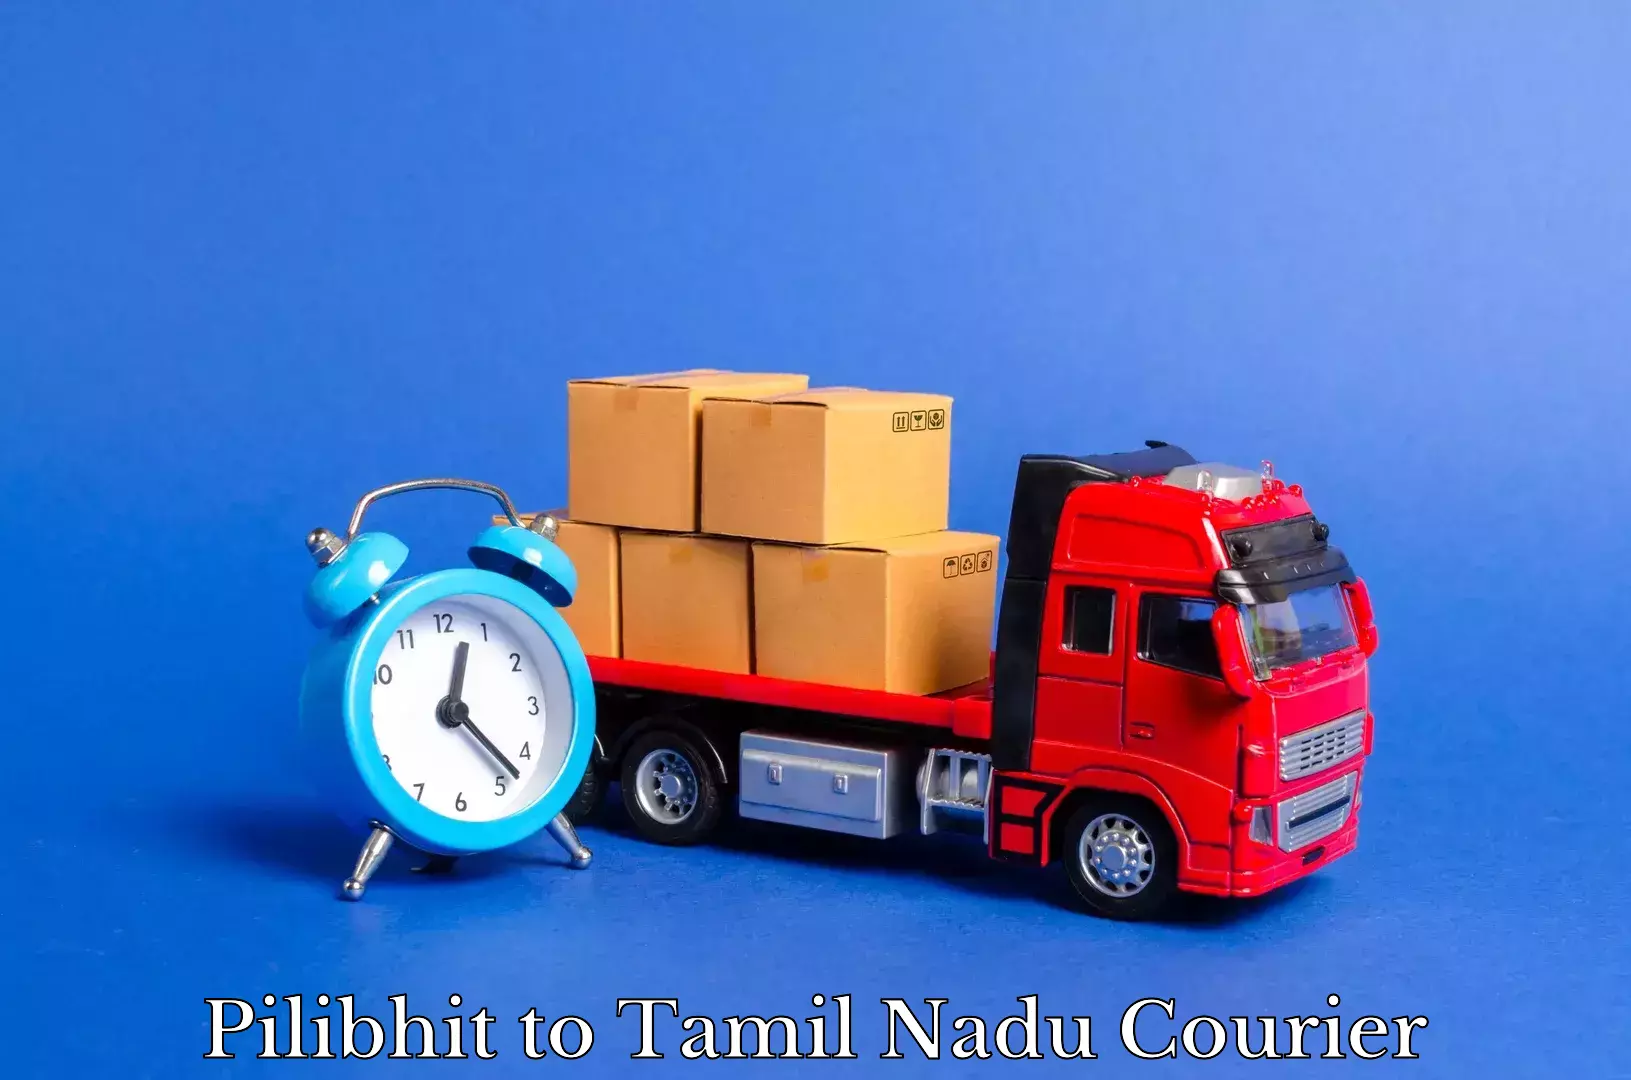 Furniture moving specialists Pilibhit to University of Madras Chennai